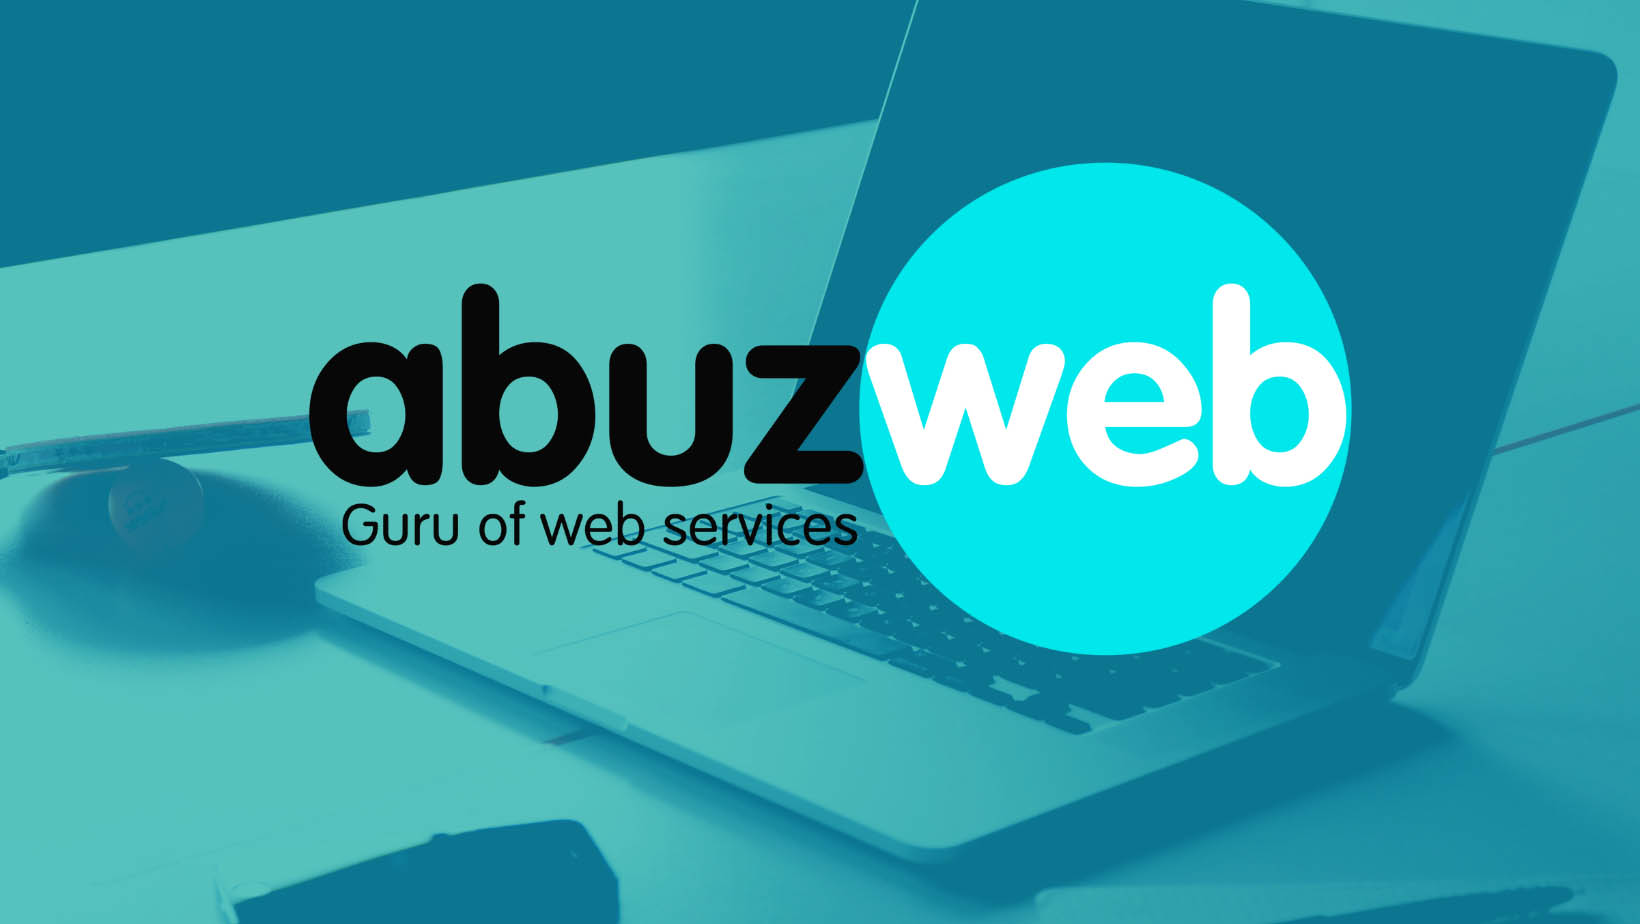 Why choose AbuzWeb web agency for your web services? | AbuzWeb - #1 Web Services Agency based in Benin, Africa and Colorado, USA